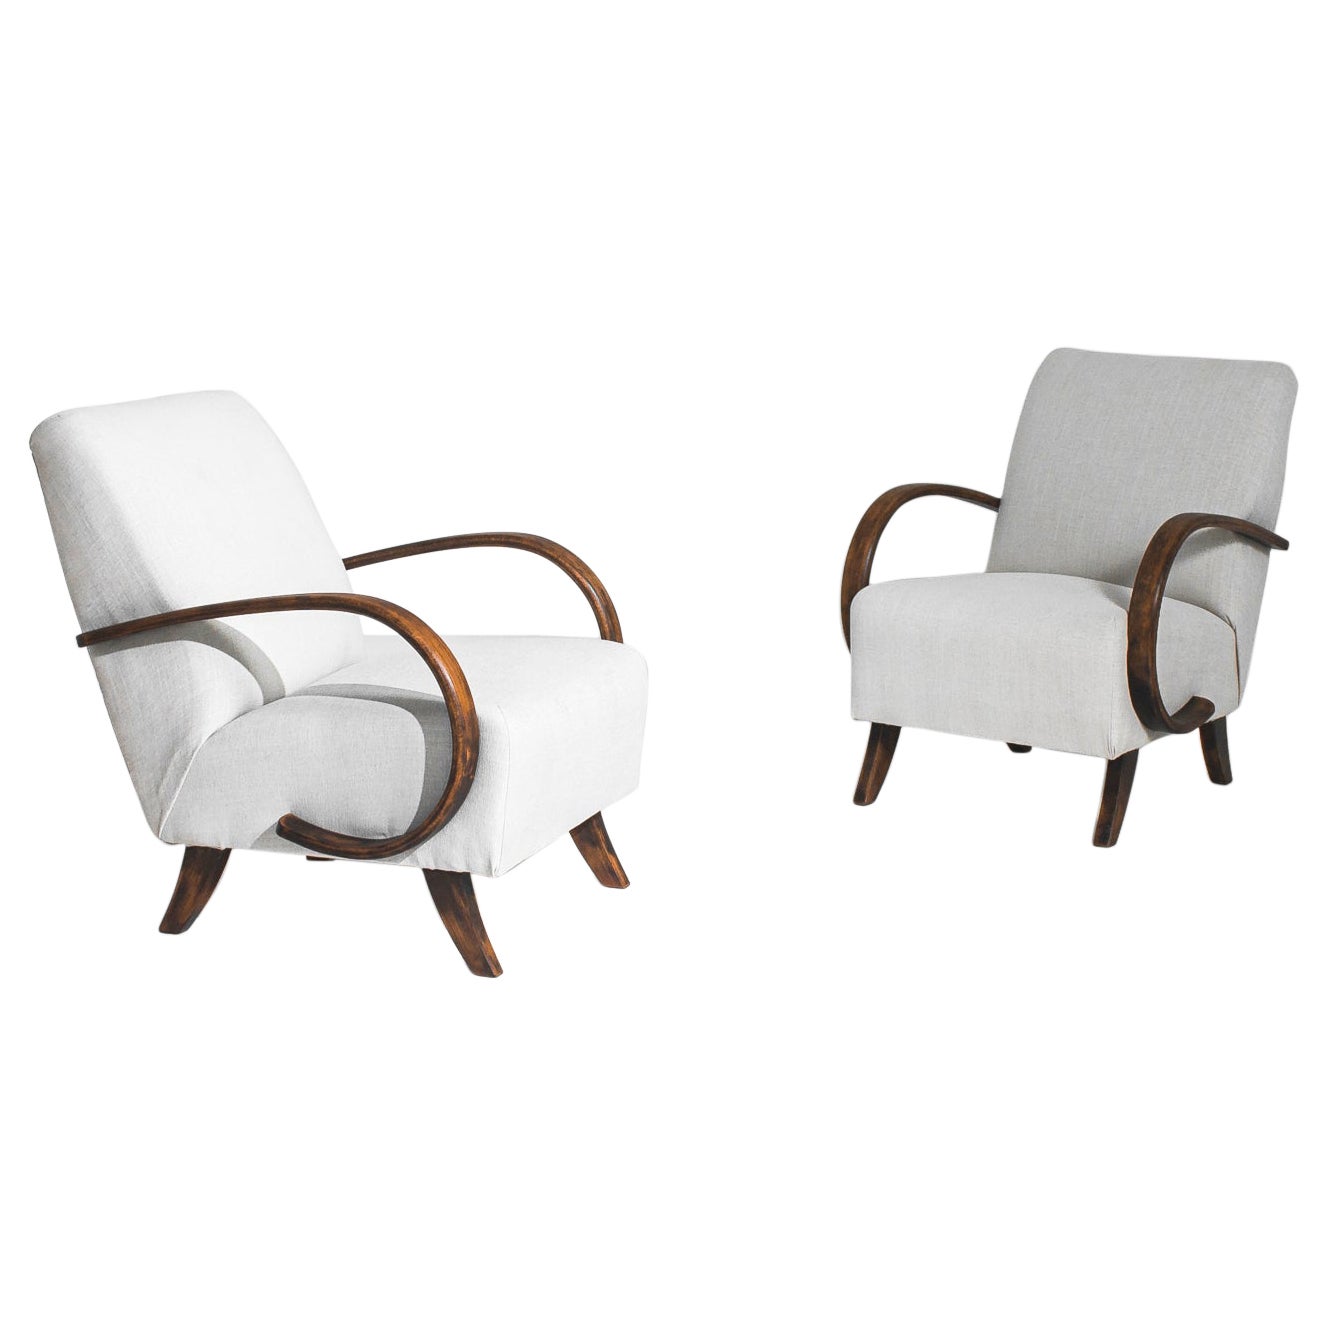 1950s Bentwood Armchairs by J. Halabala, a Pair